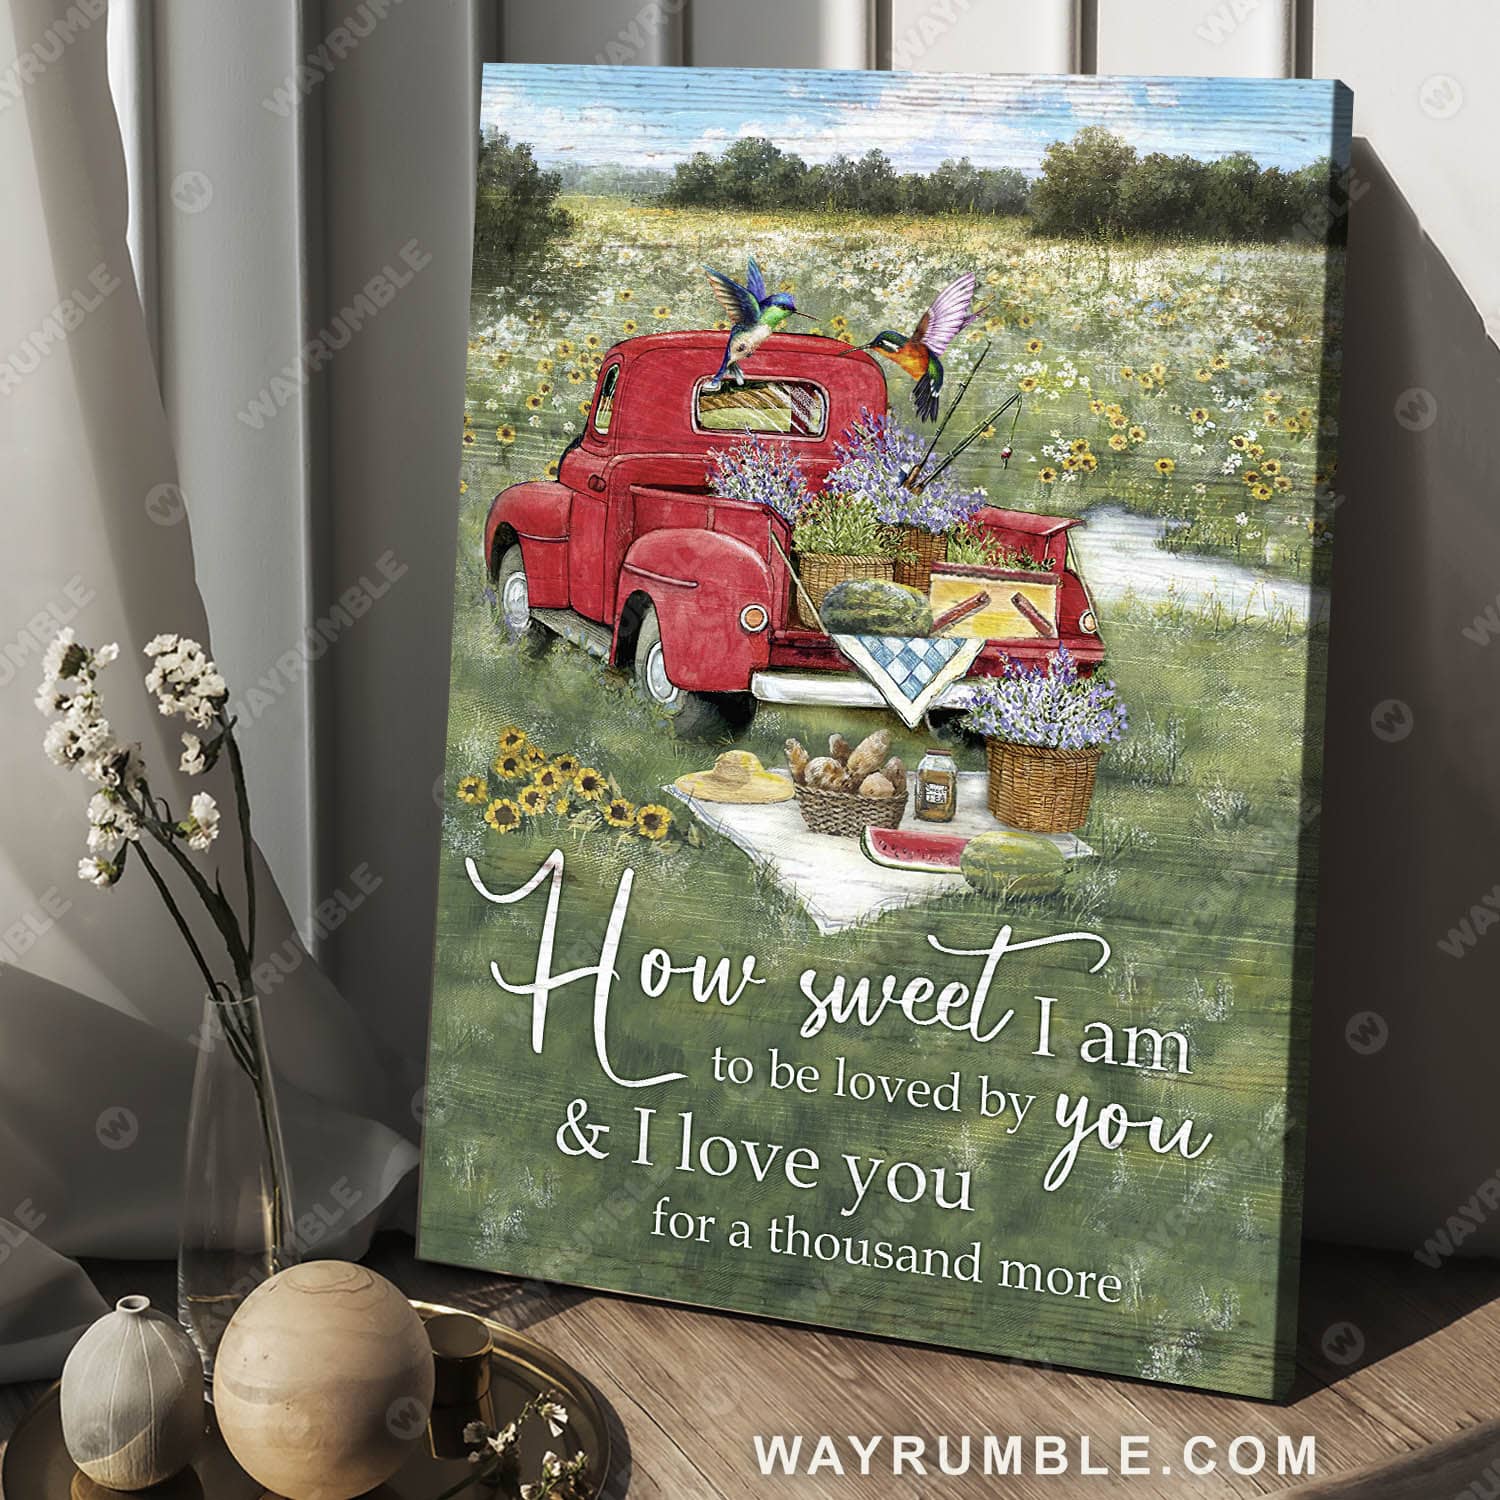 A picnic, Red truck, On grass field, I love you for a thousand more - Couple Portrait Canvas Prints, Wall Art